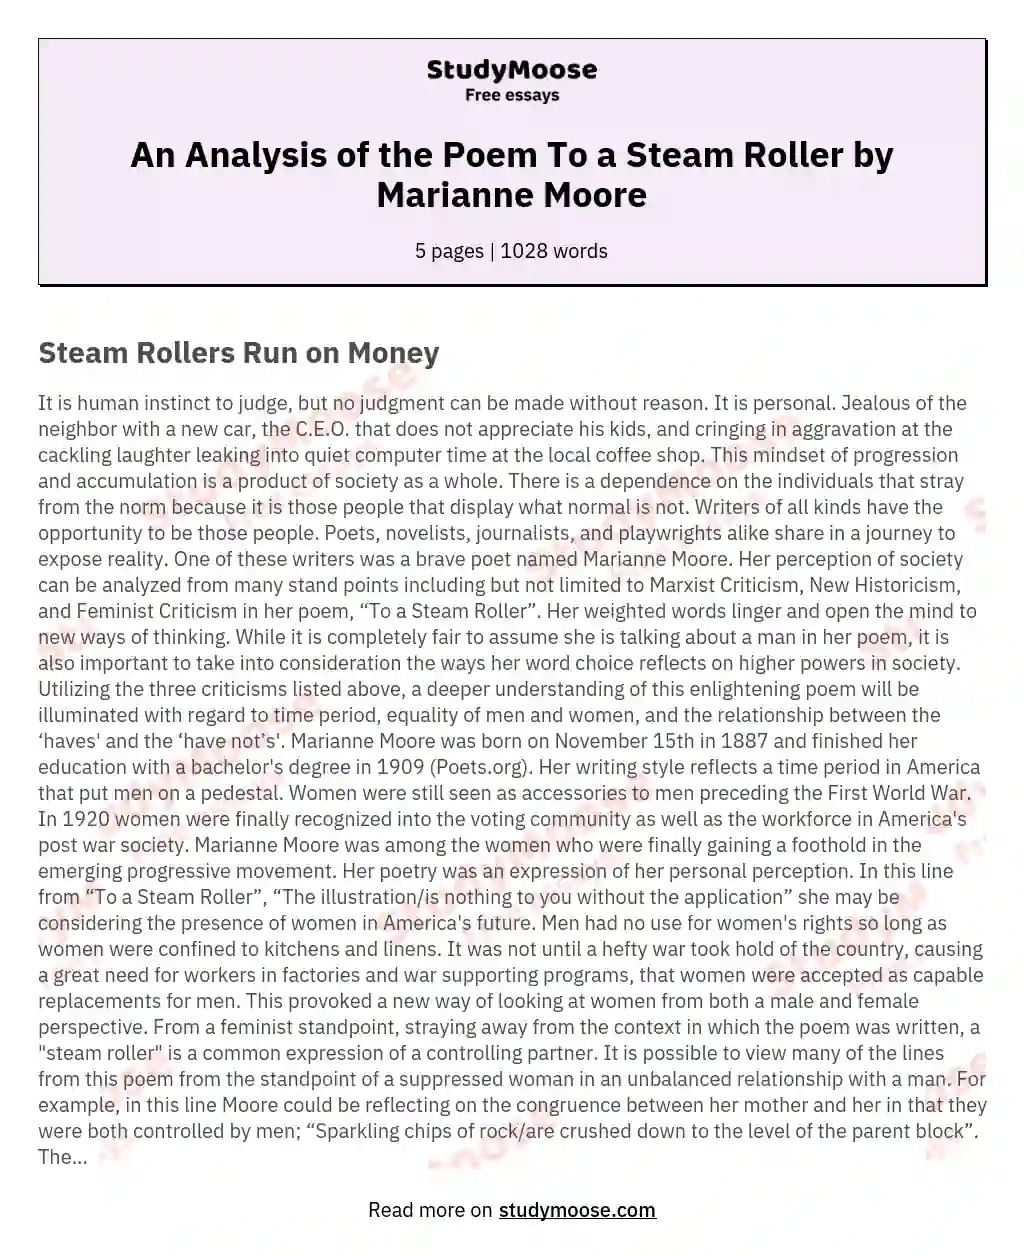 An Analysis of the Poem To a Steam Roller by Marianne Moore essay